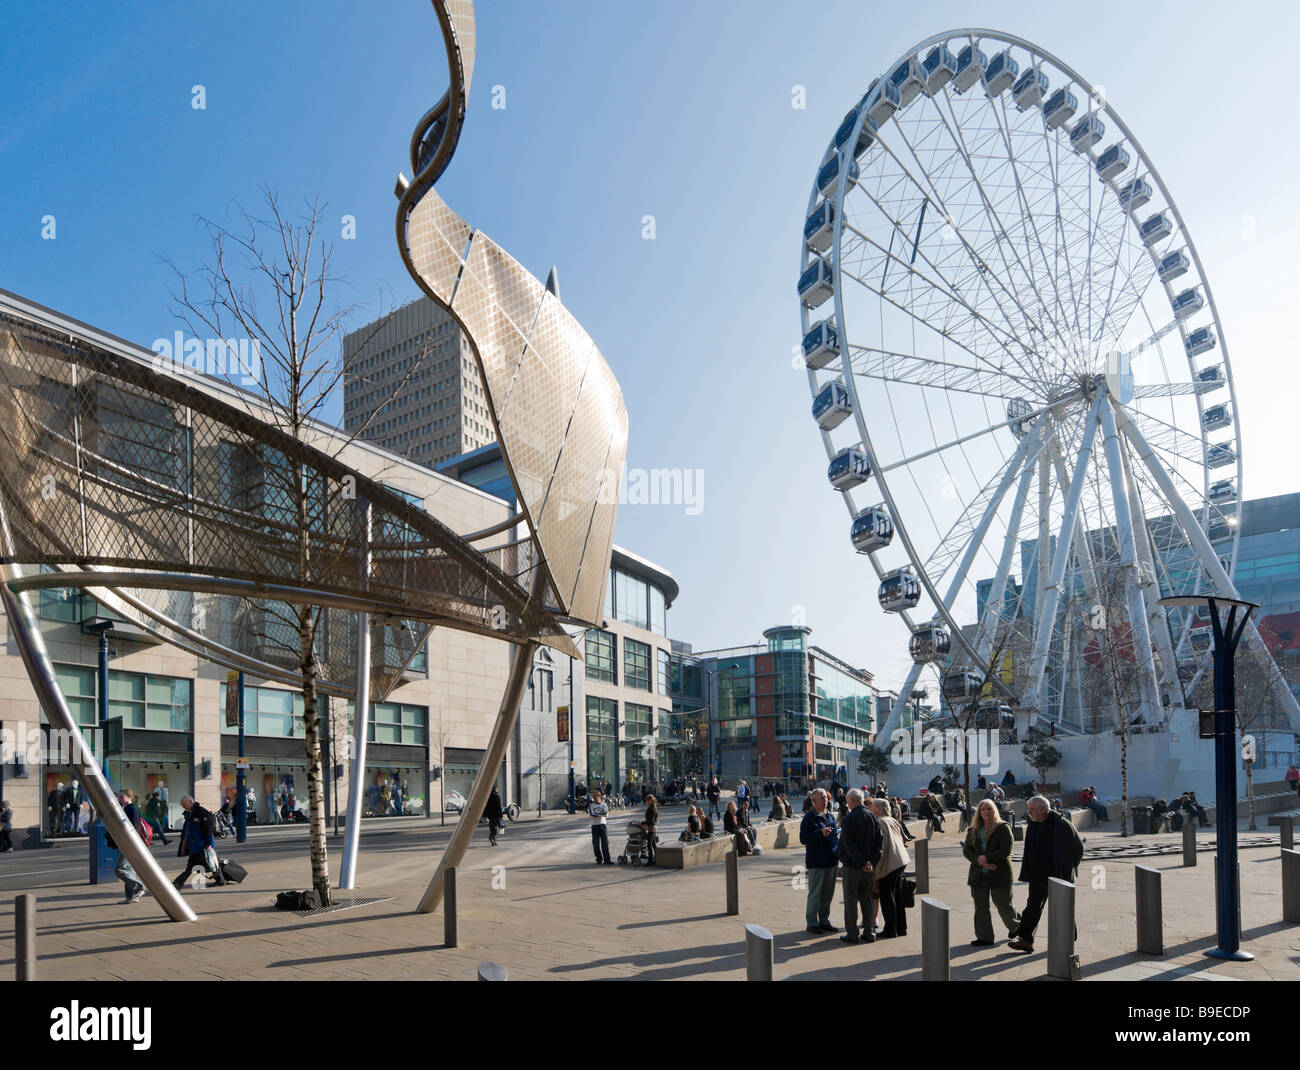 The Manchester Wheel in Exchange Square, Manchester, England Stock Photo